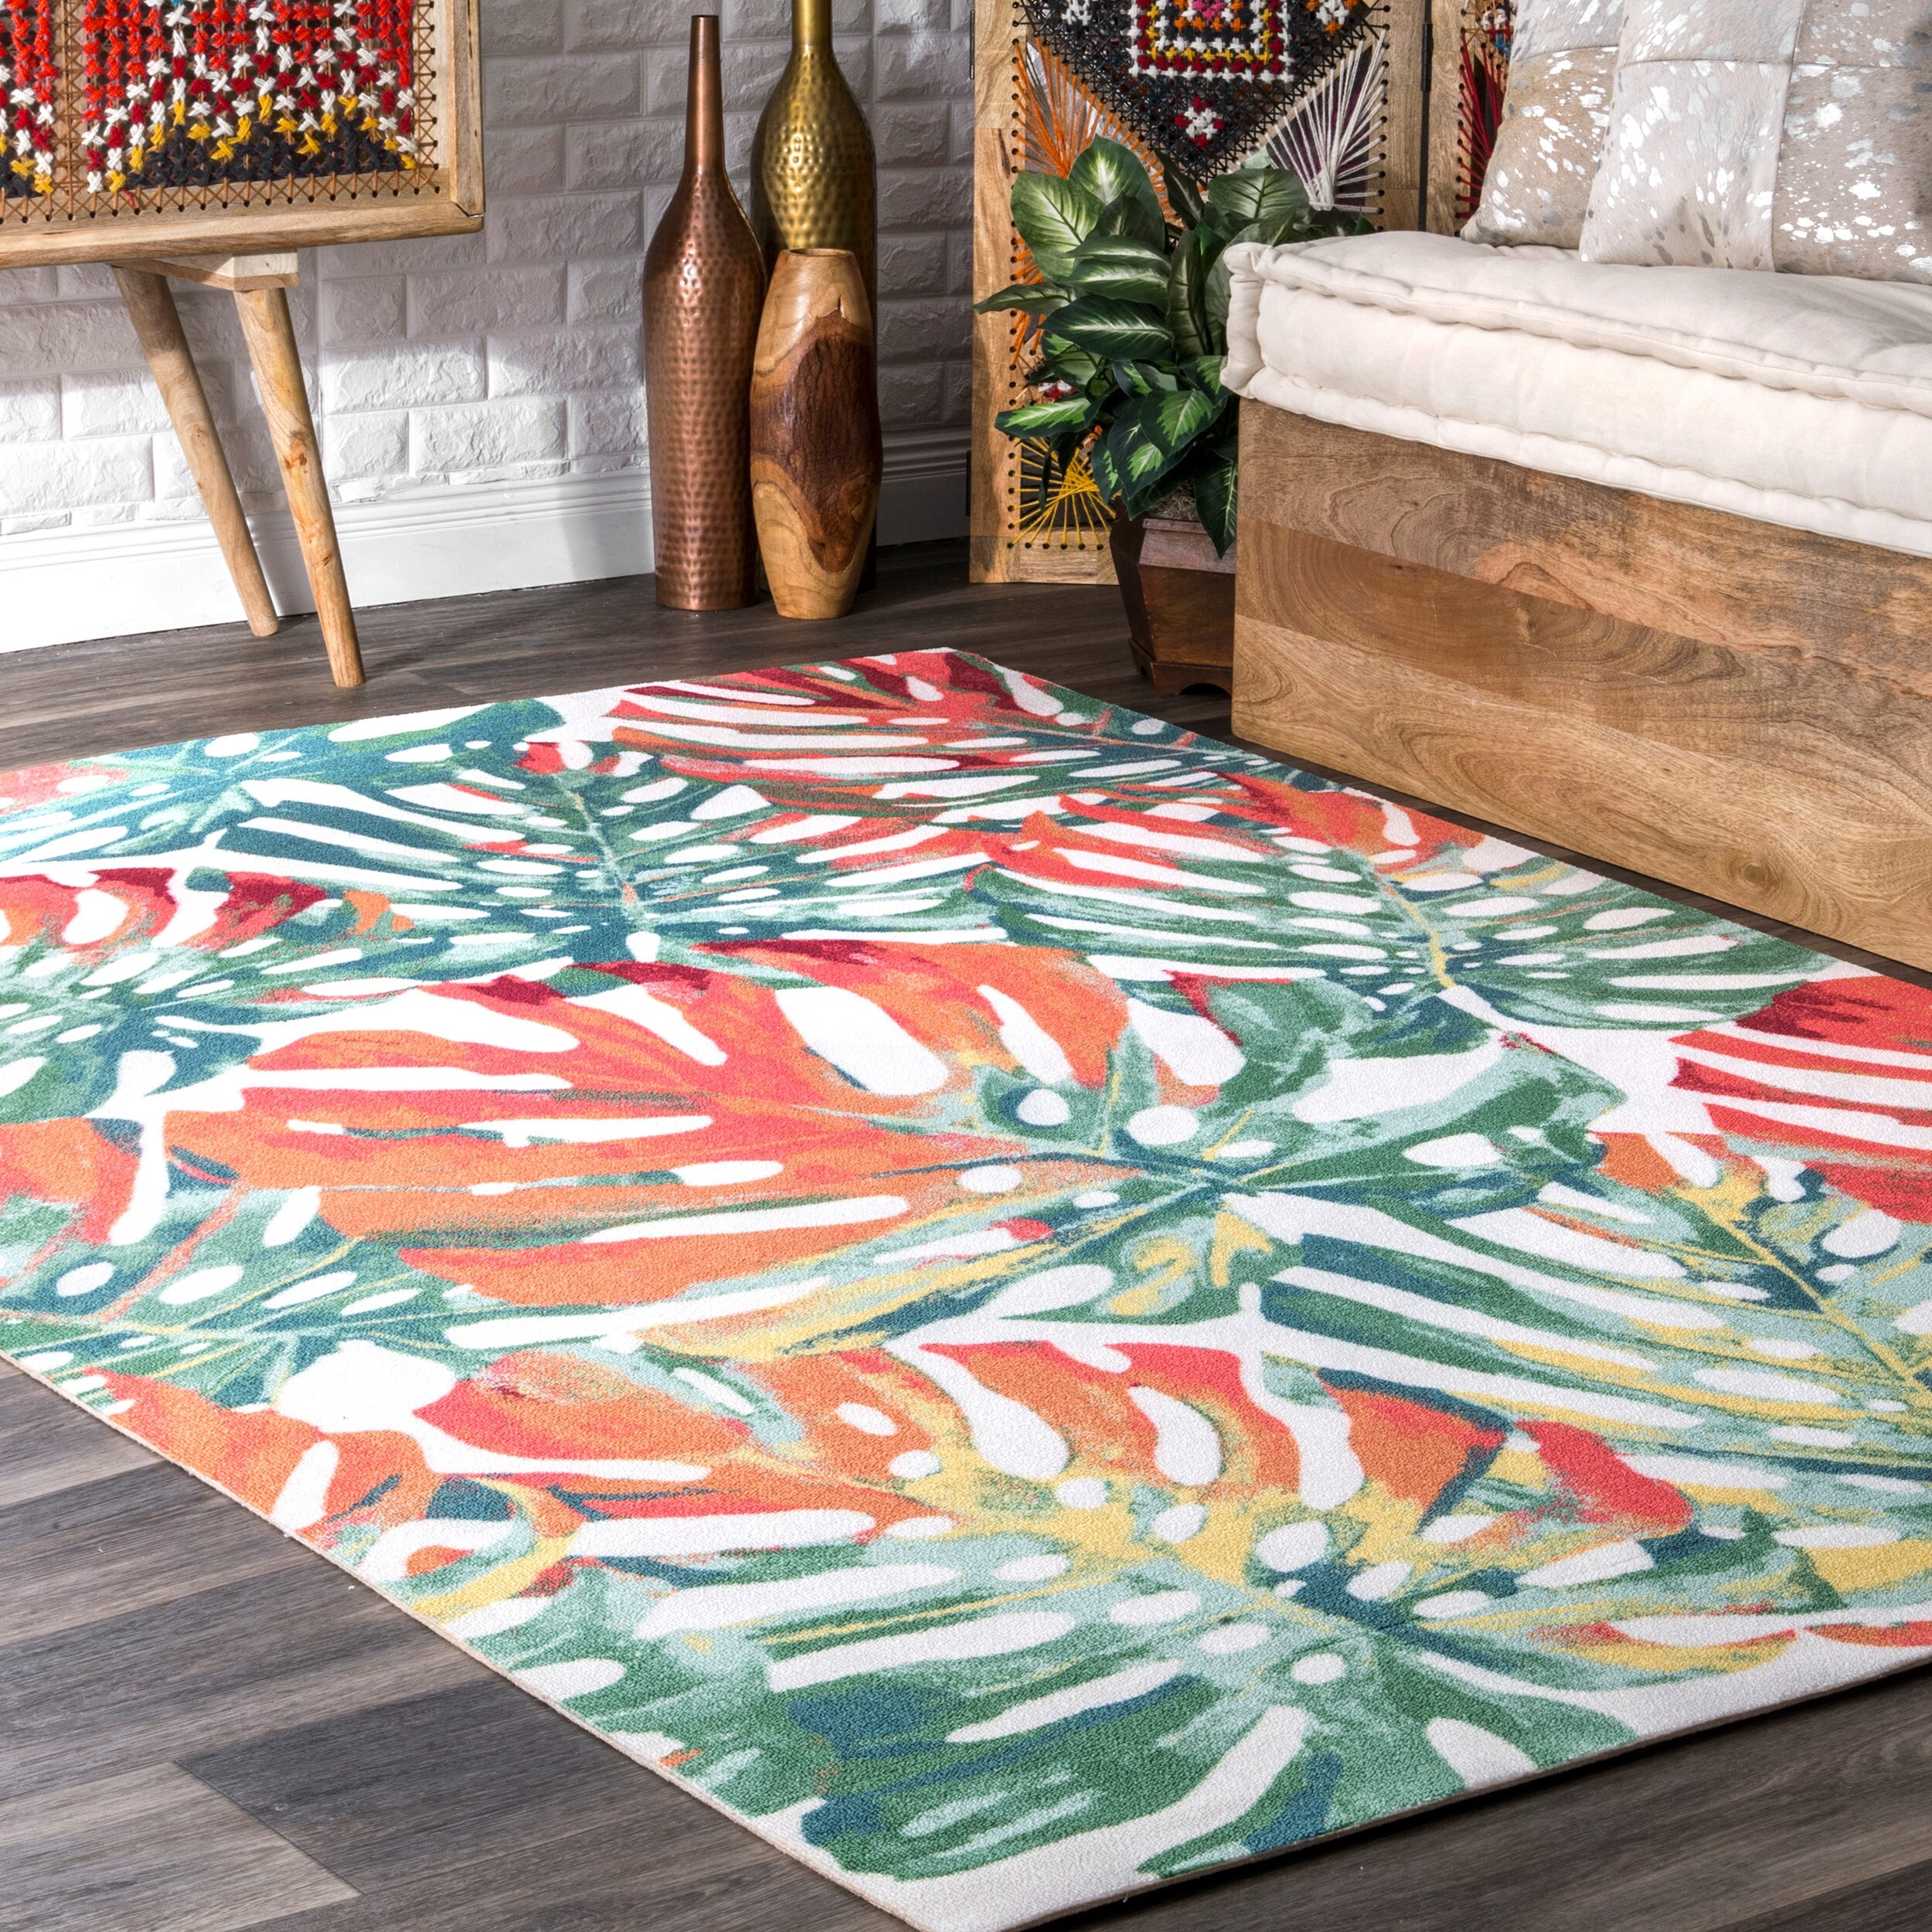 ALAZA Tropical Trendy Flamingo Bird Leaves Area Rug Rugs for Living Room Bedroom 7' x 5' 